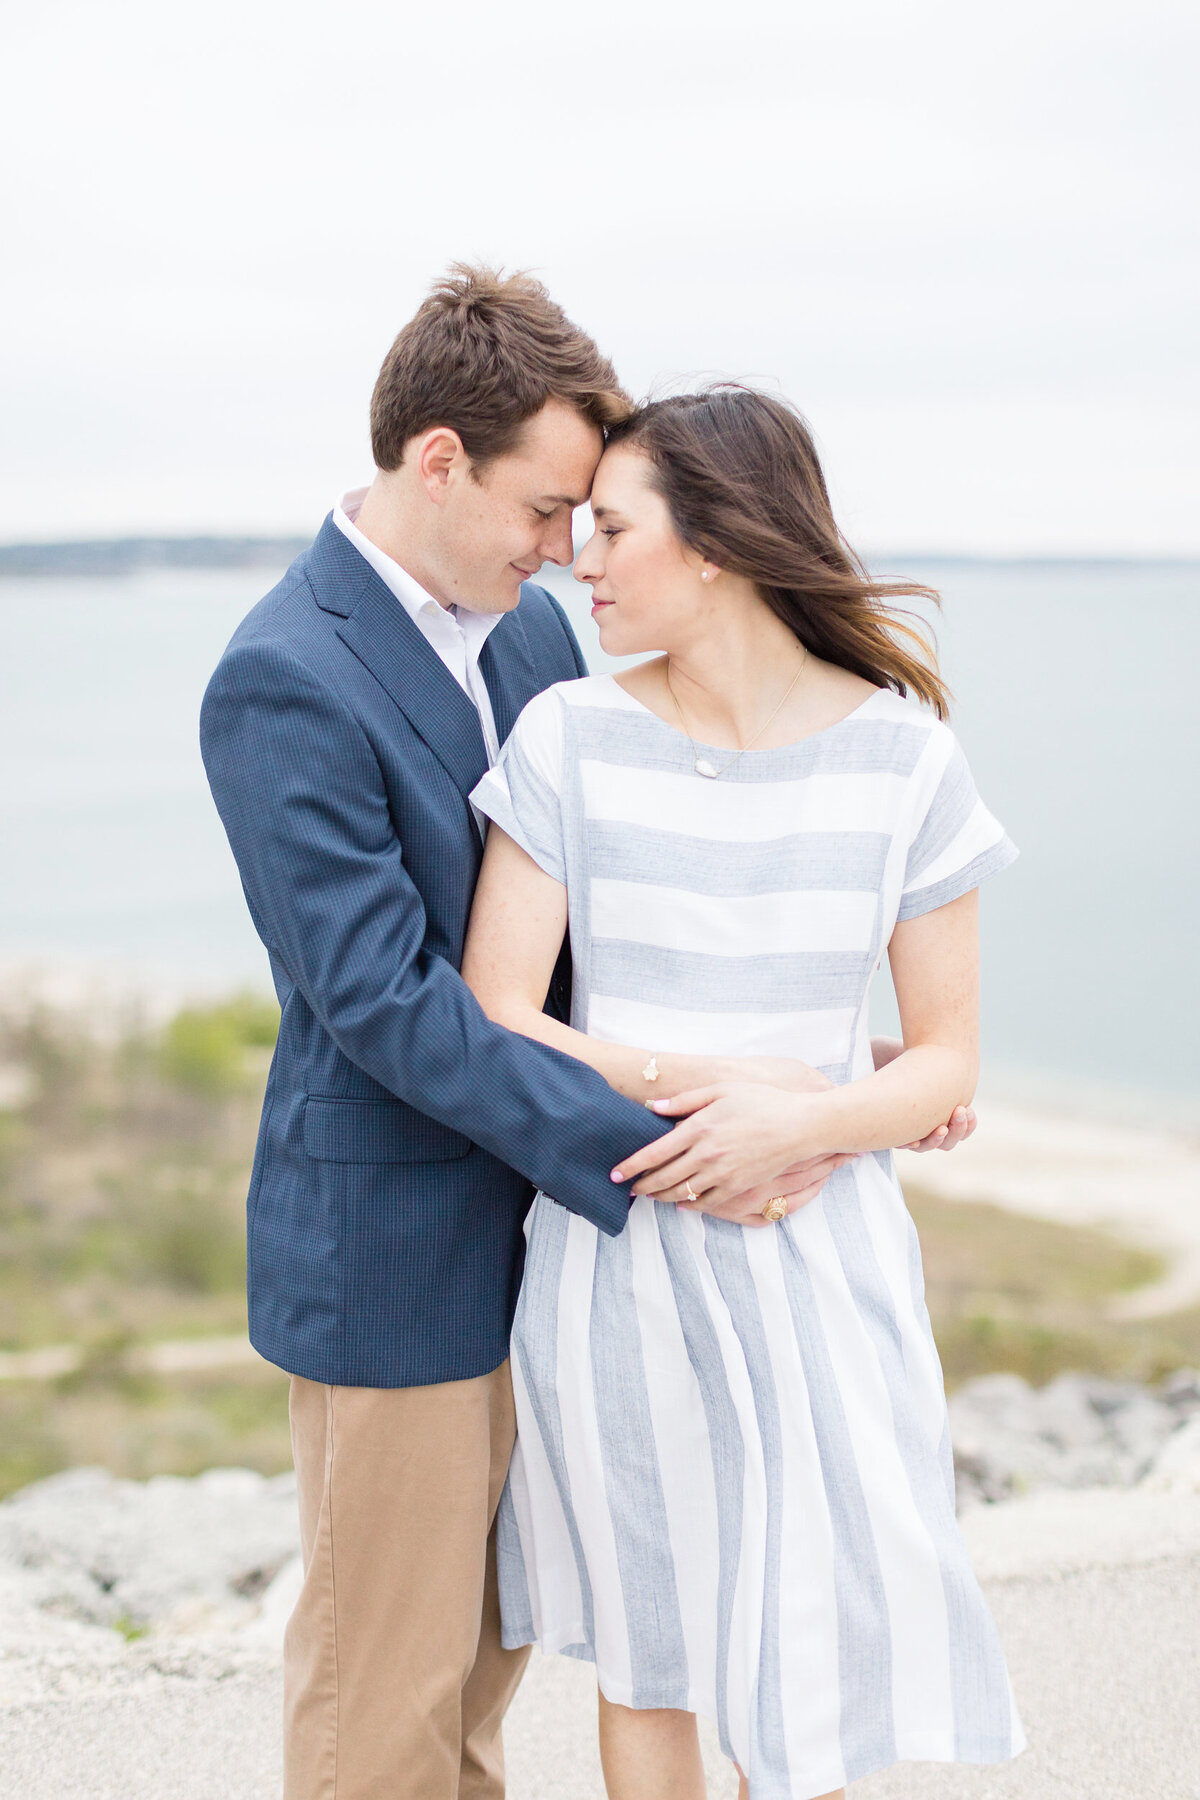 Jessica Chole Photography San Antonio Texas California Wedding Portrait Engagement Maternity Family Lifestyle Photographer Souther Cali TX CA Light Airy Bright Colorful Photography18